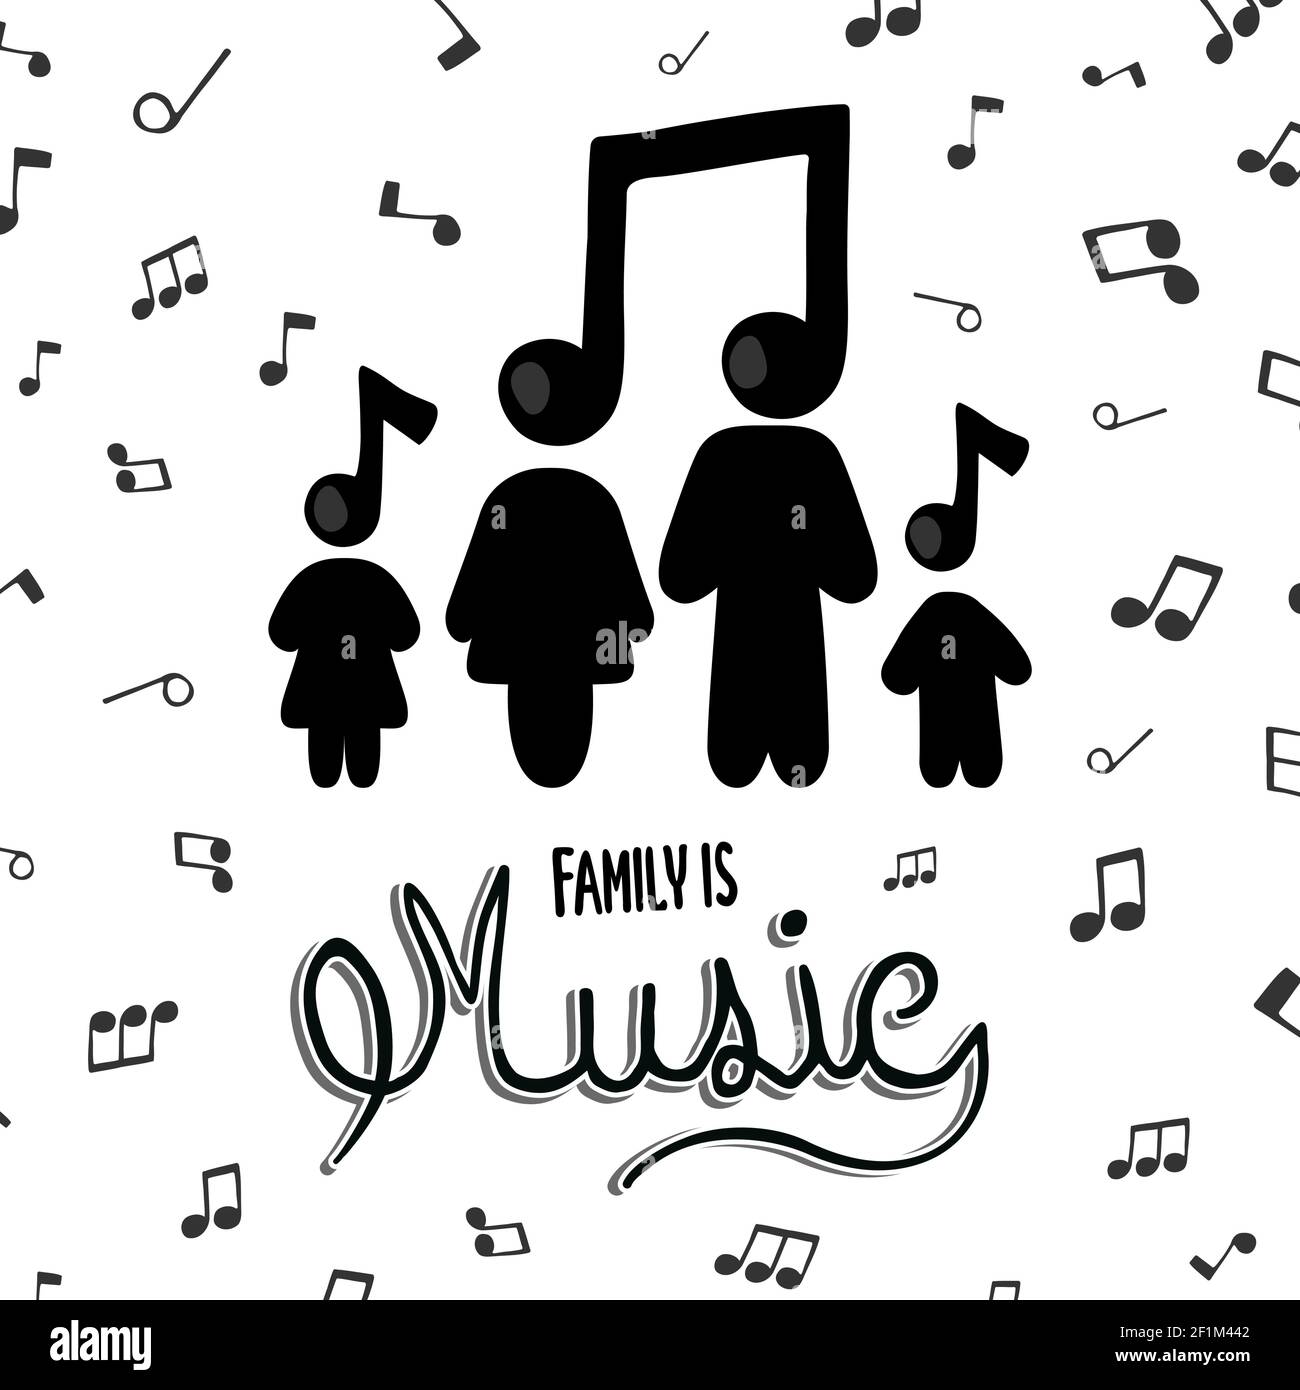 Family is music text quote illustration for musical concept. Mom, dad, children cartoon with sound note background in black and white color. Stock Vector